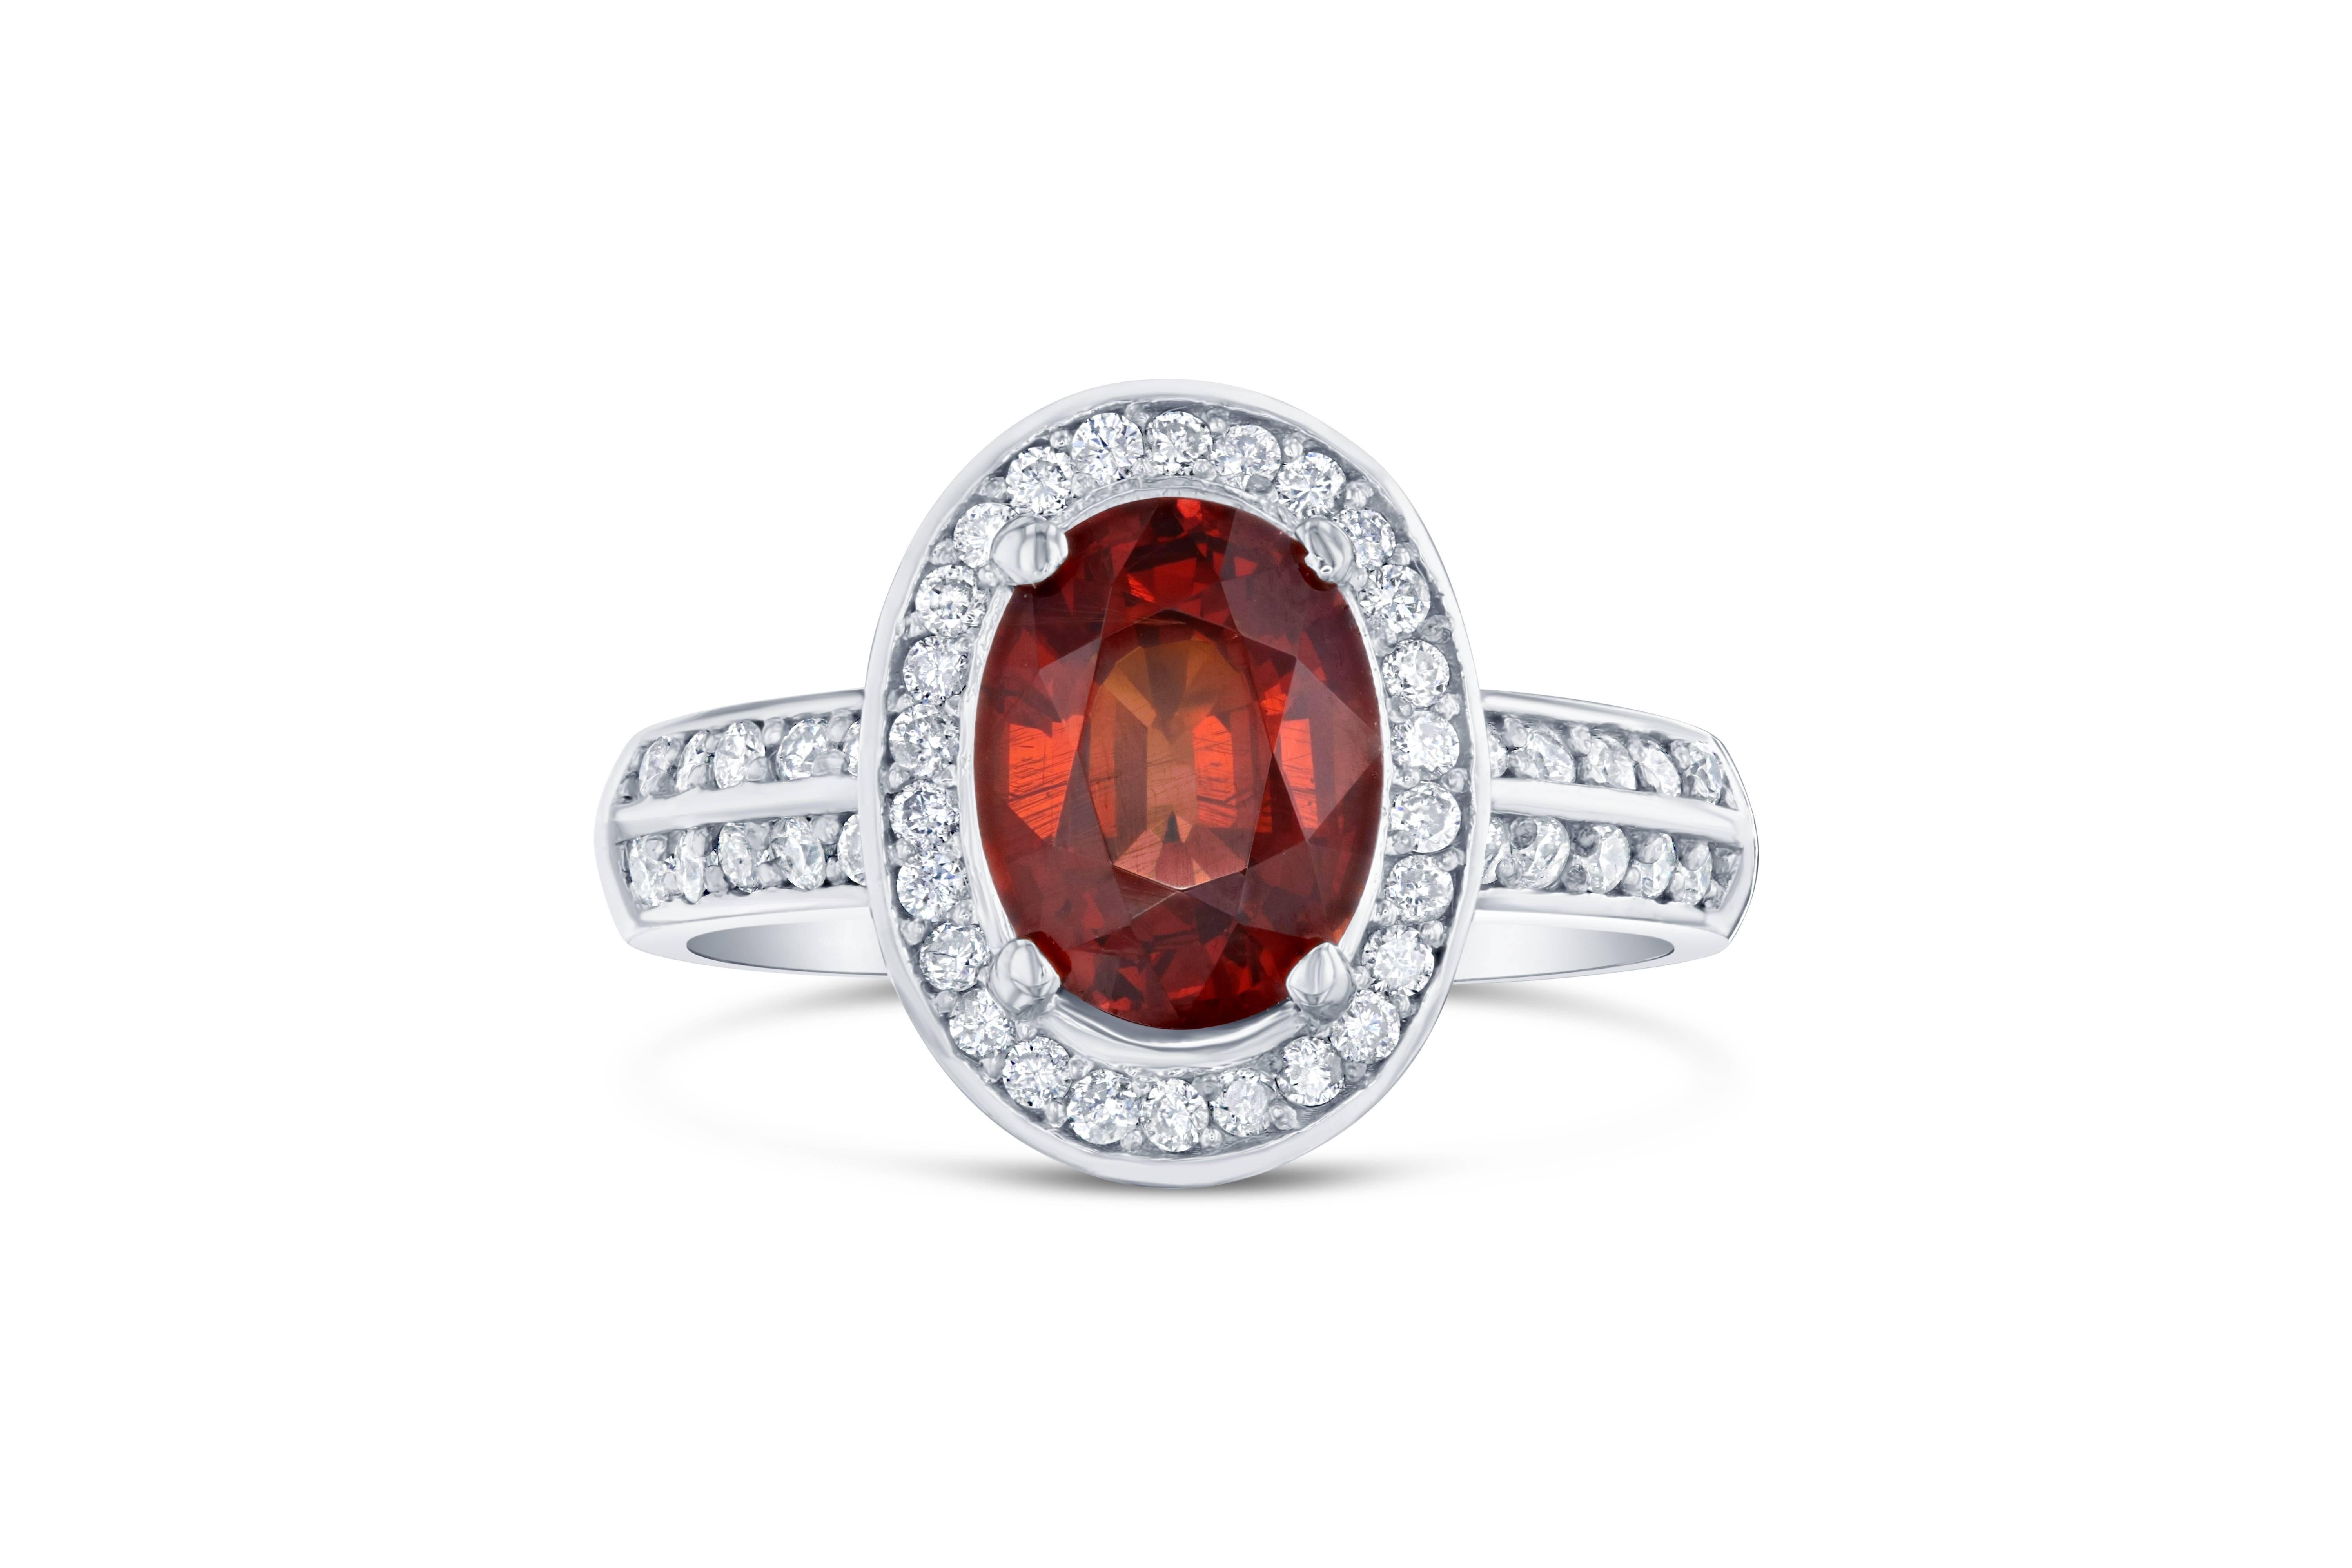 This simple everyday ring has a gorgeous 2.87 Carat Oval Cut Spessartine Garnet. Spessartines are natural gemstones. The ring is surrounded by a halo of 46 Round Cut Diamonds surrounding the stone and on the shank of the ring that weigh 0.45 carat.